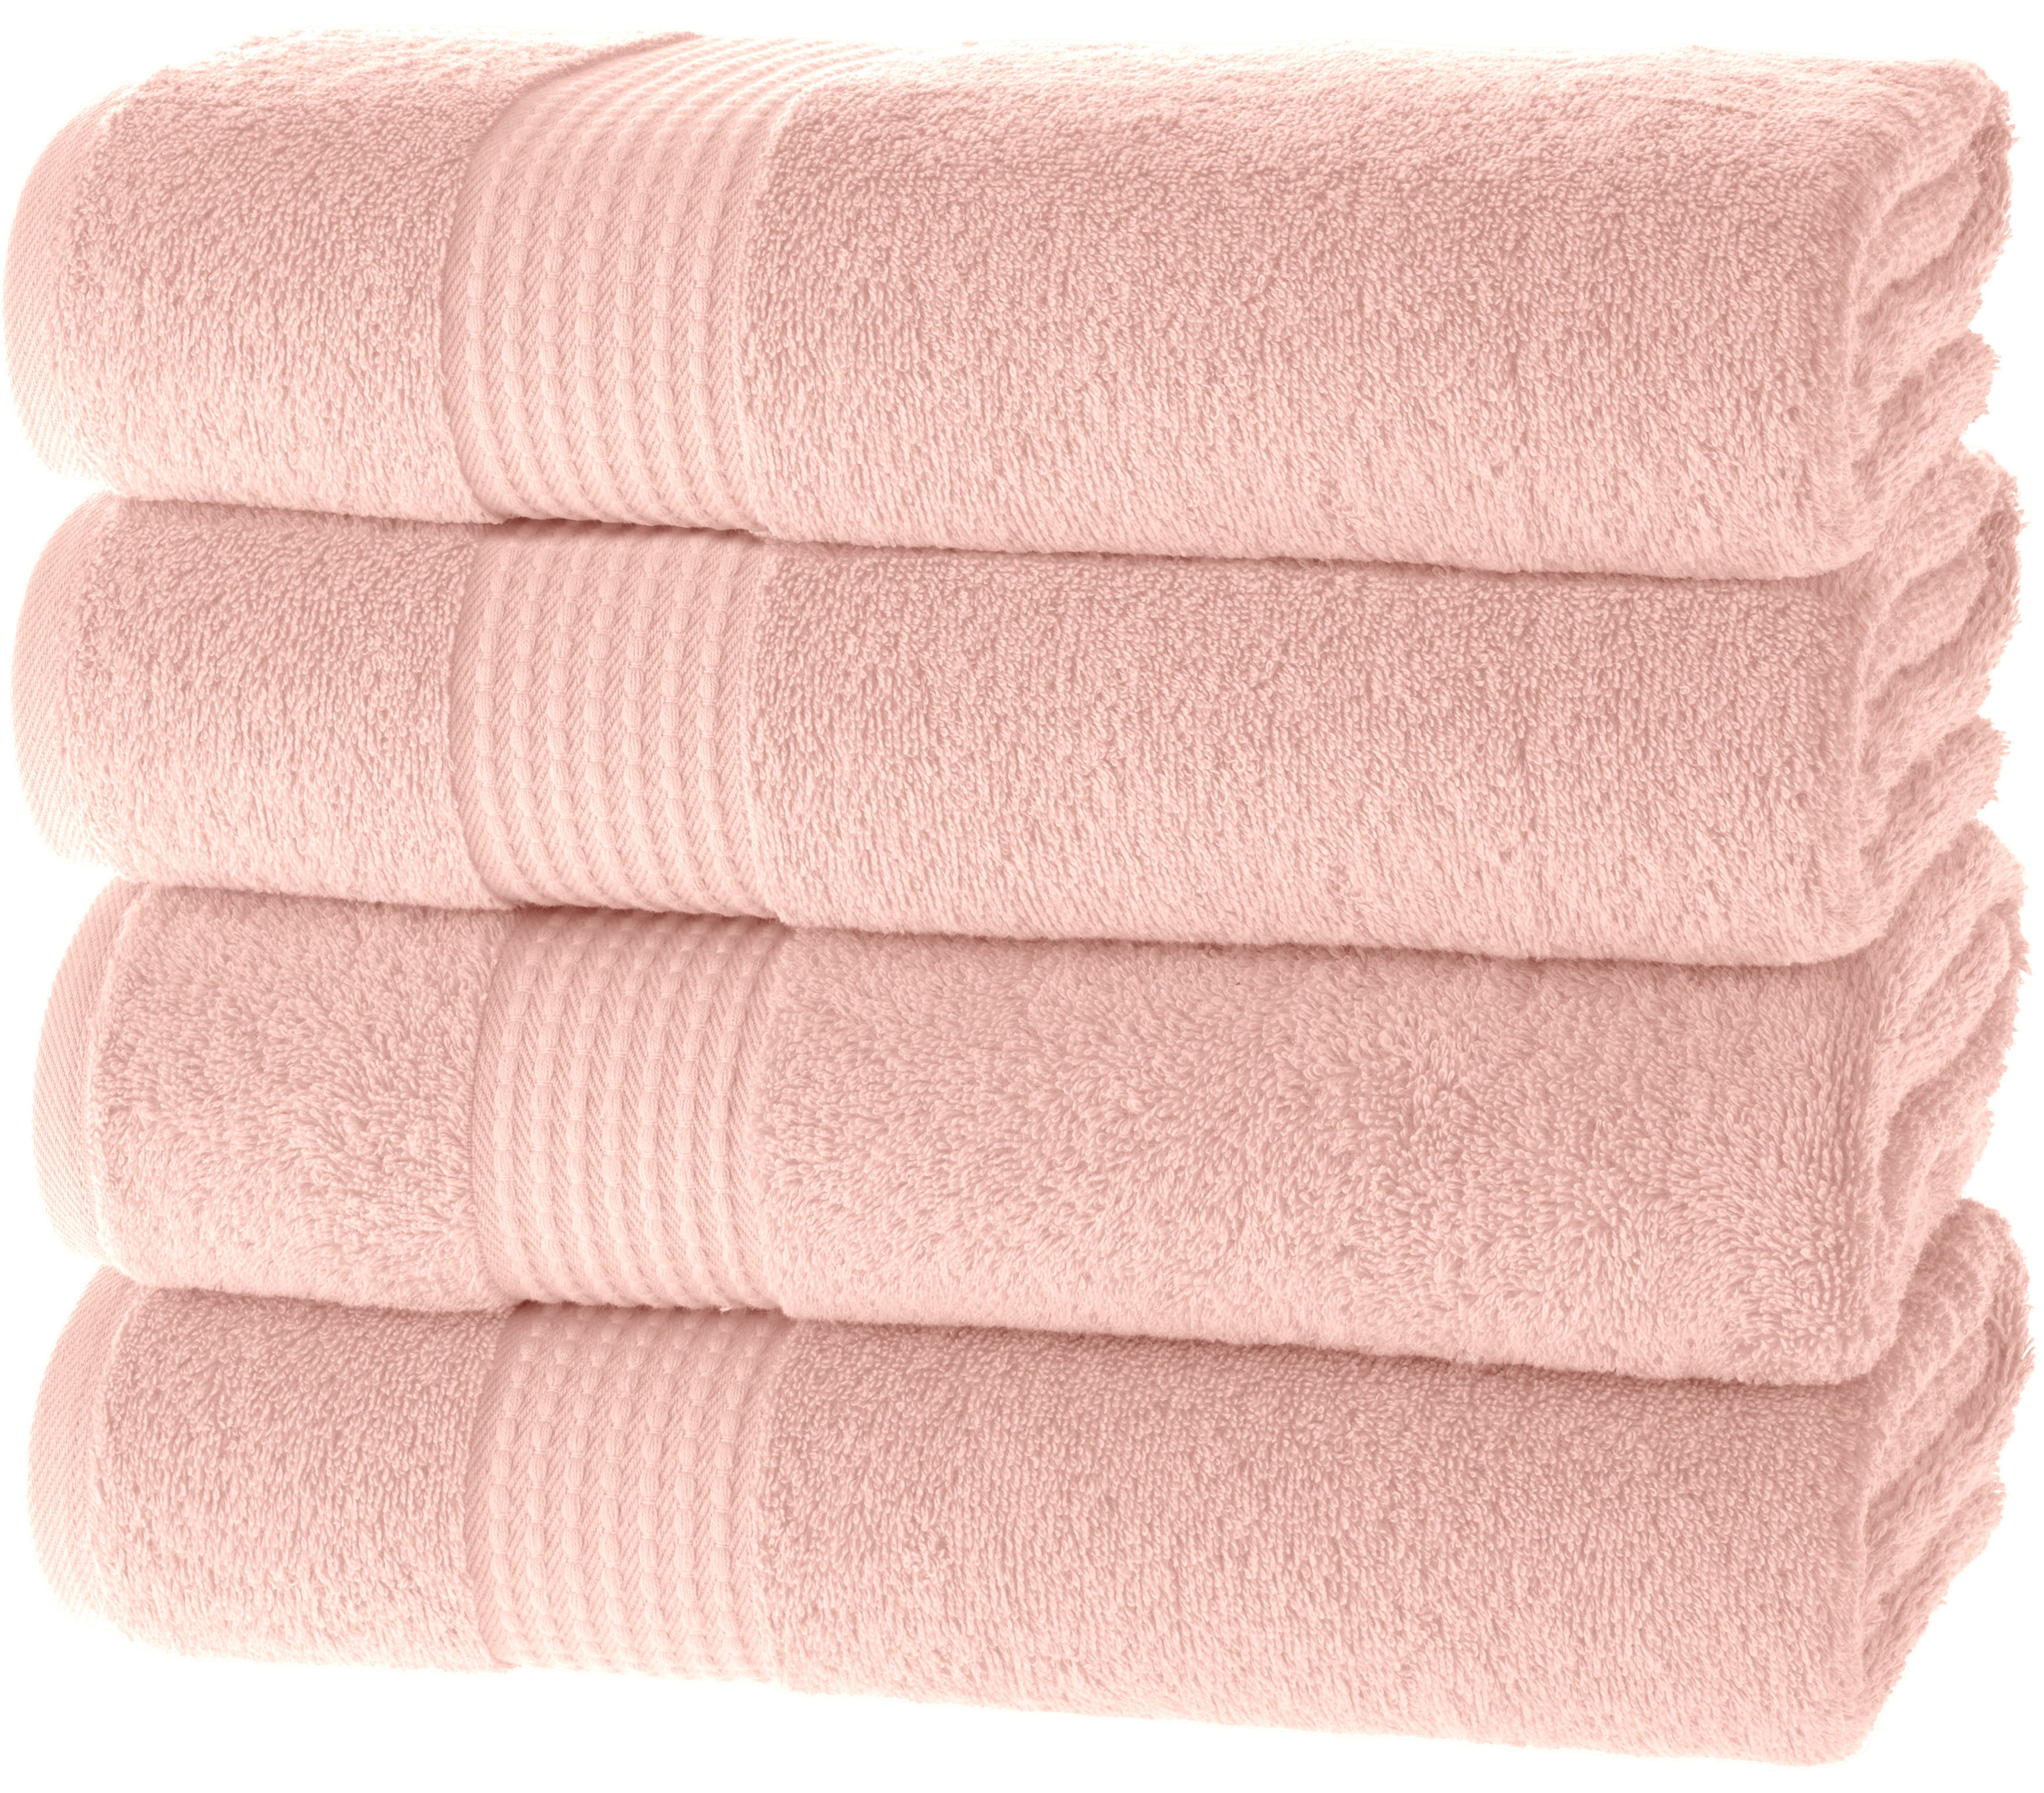 Maura Basics Performance Wash Cloths with Hanging Loop. 13x13 American Standard Towel Size. Soft, Durable, Long Lasting and Absorbent | 100% Turkish